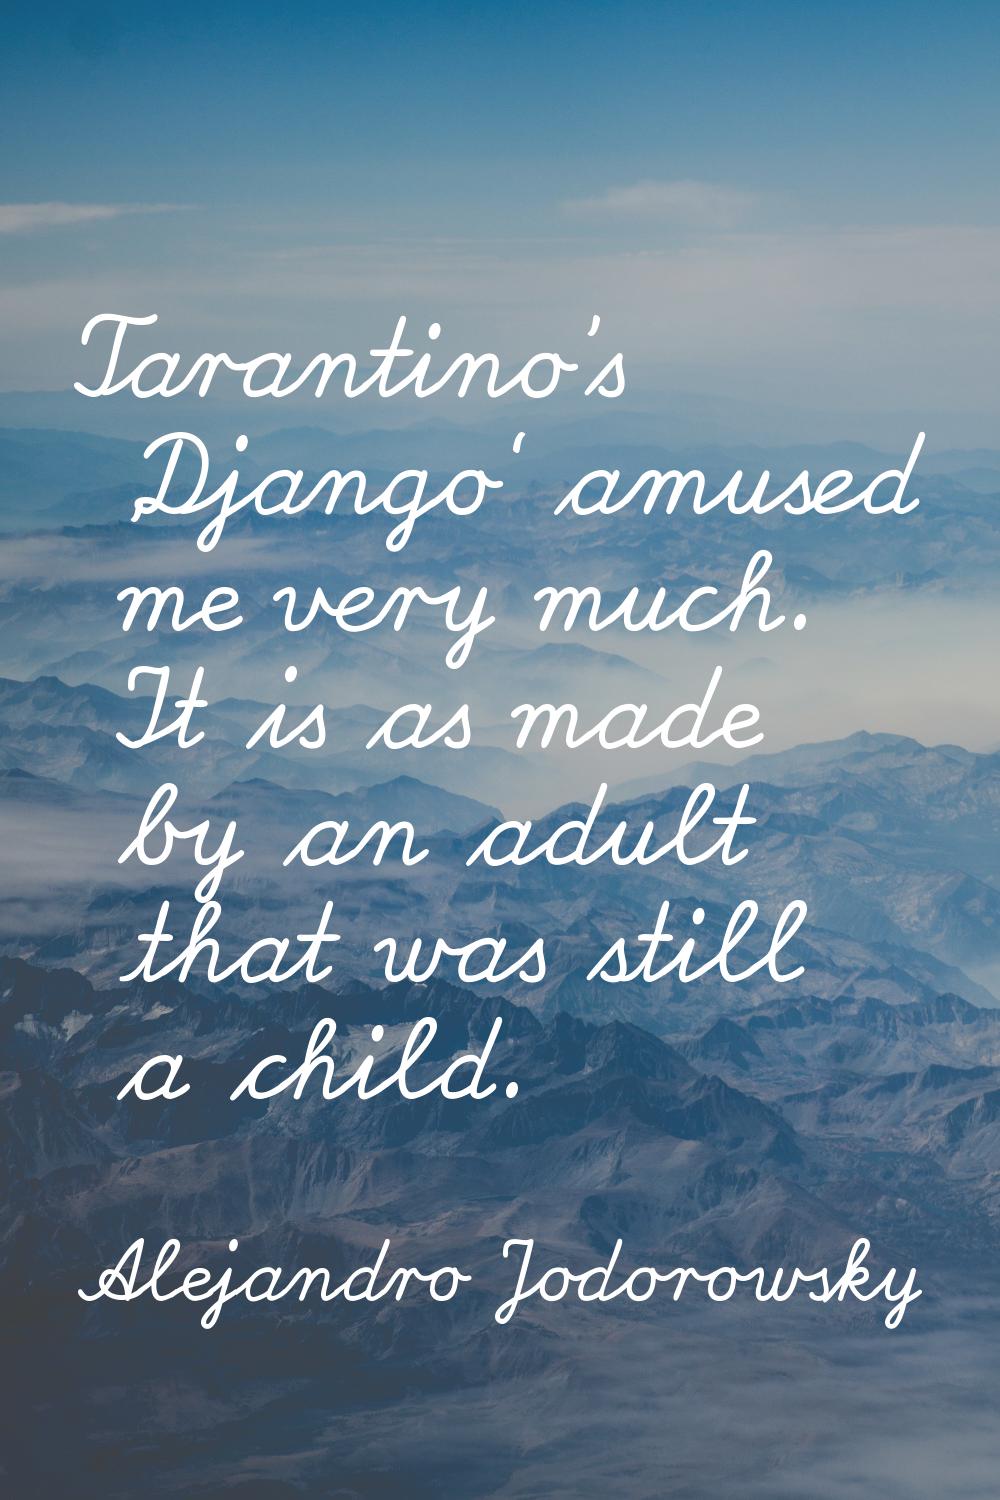 Tarantino's 'Django' amused me very much. It is as made by an adult that was still a child.